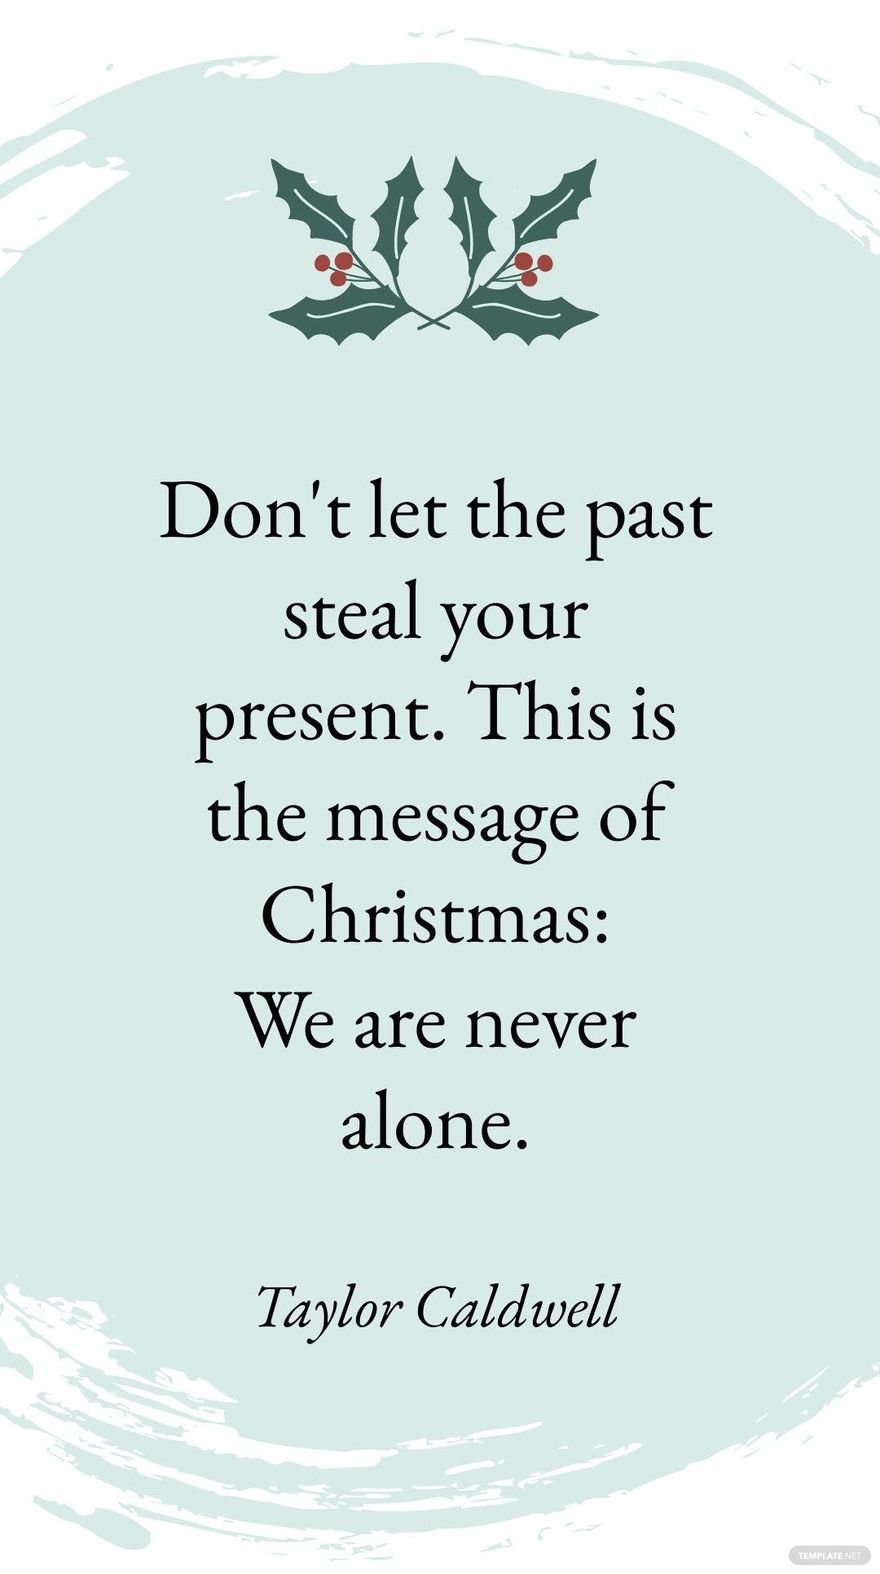 Taylor Caldwell - Don't let the past steal your present. This is the message of Christmas: We are never alone.